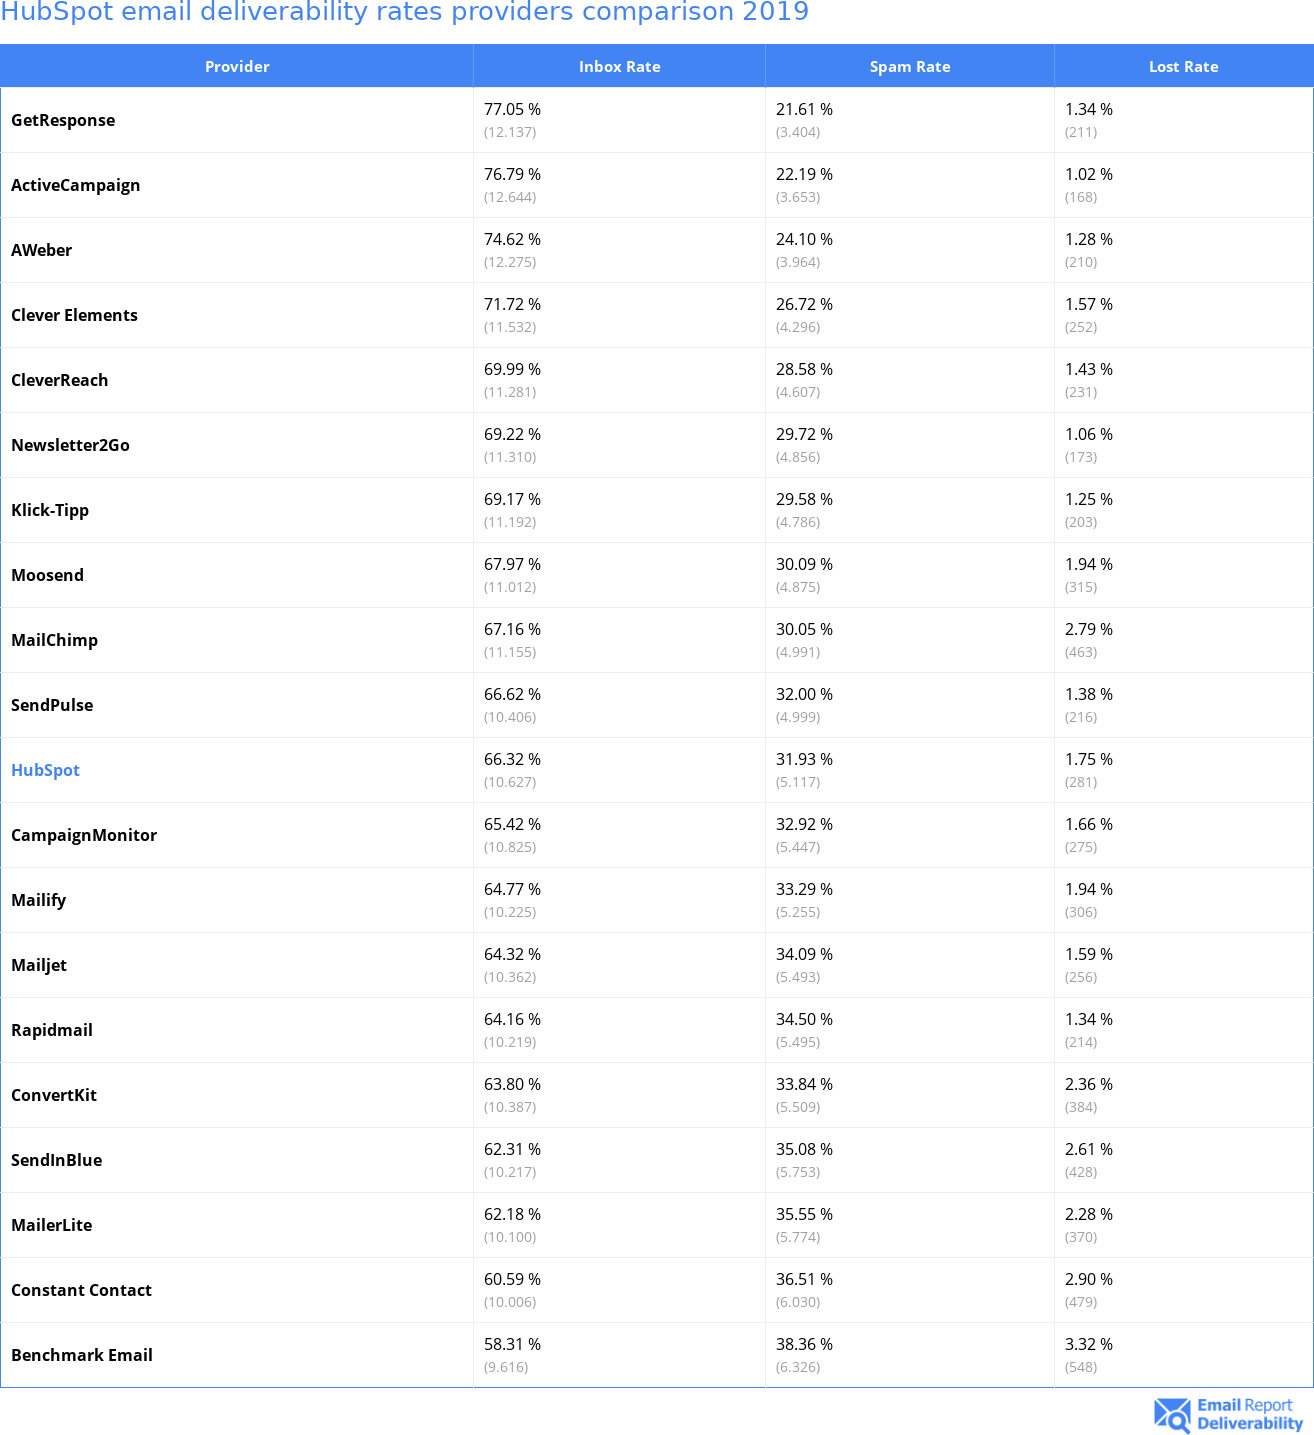 HubSpot email deliverability rates providers comparison 2019